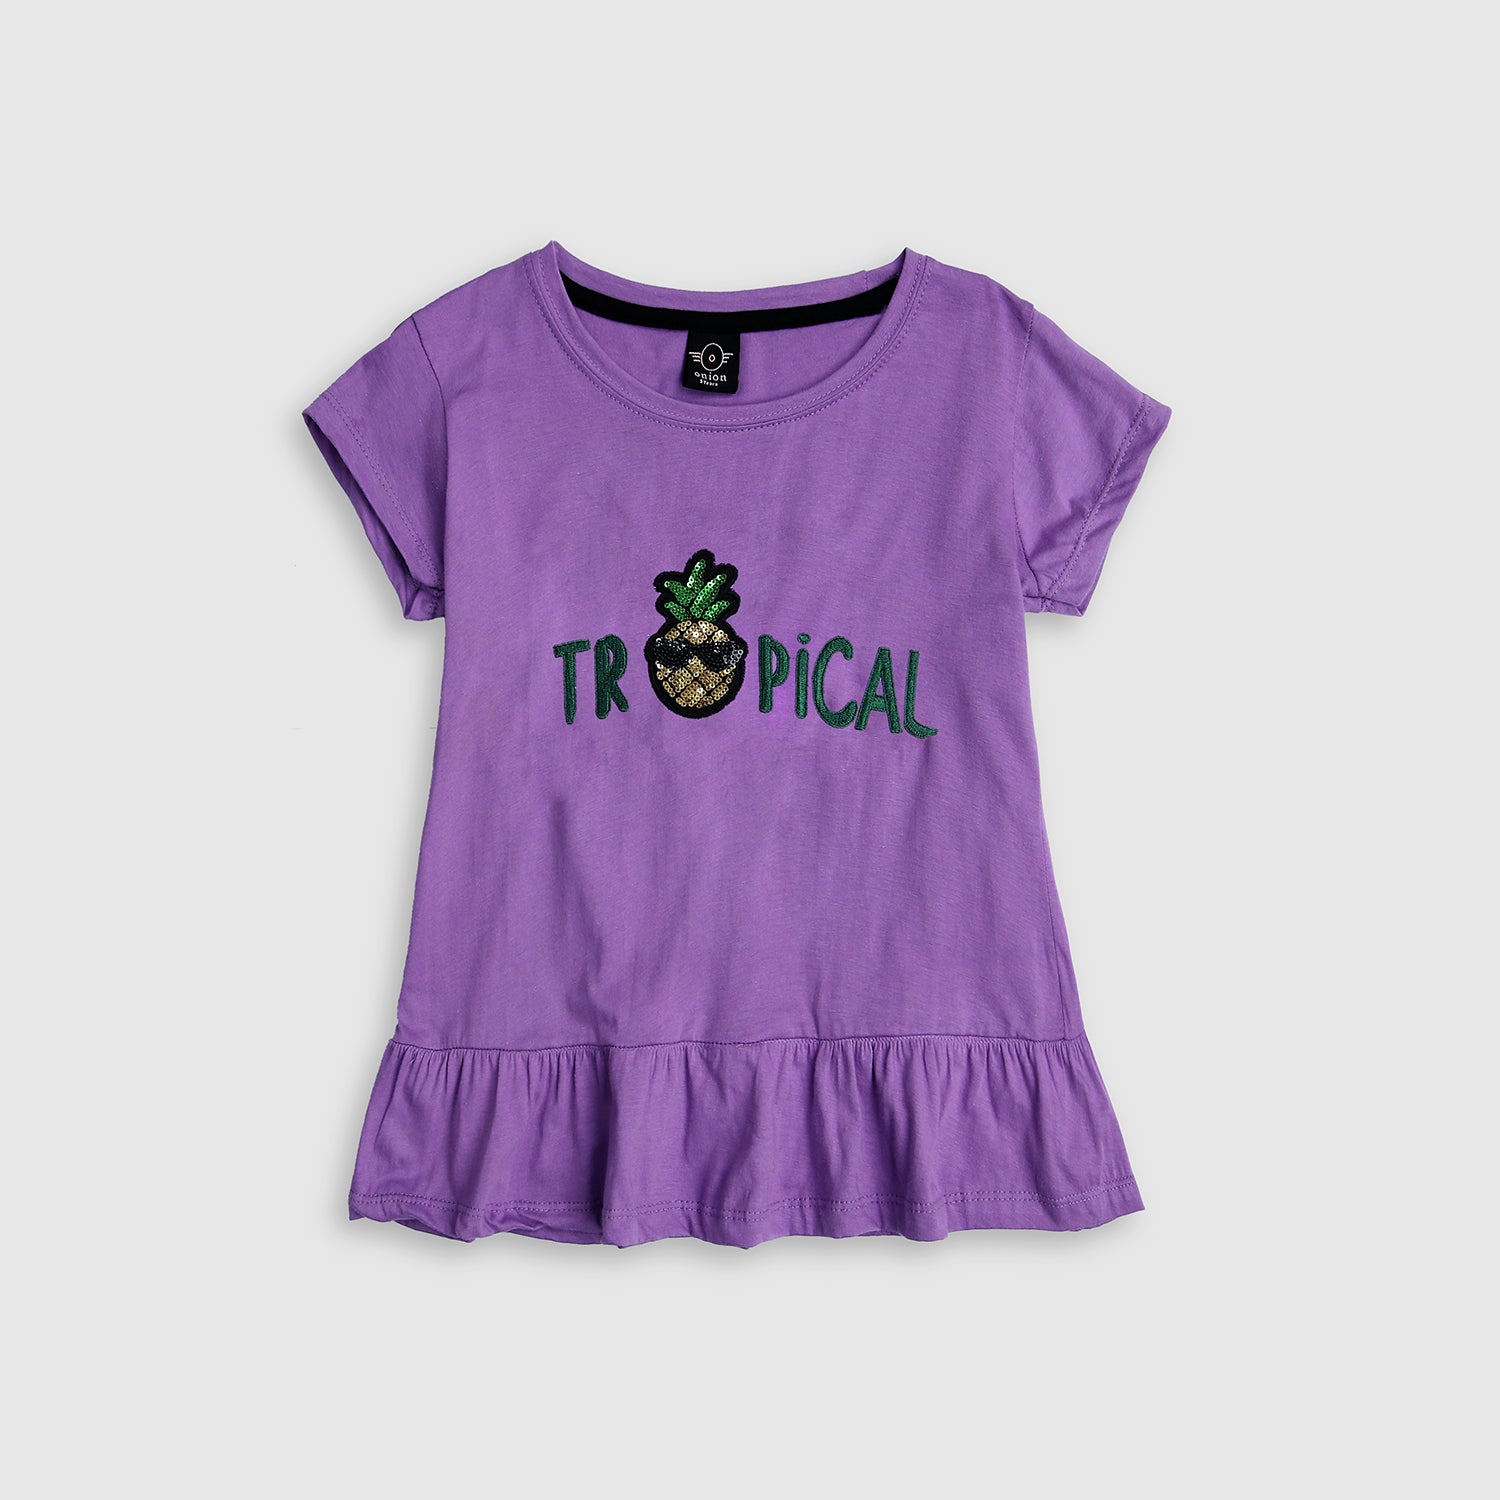 Girls Pure Cotton "Tropical" Graphic T-shirt Frock